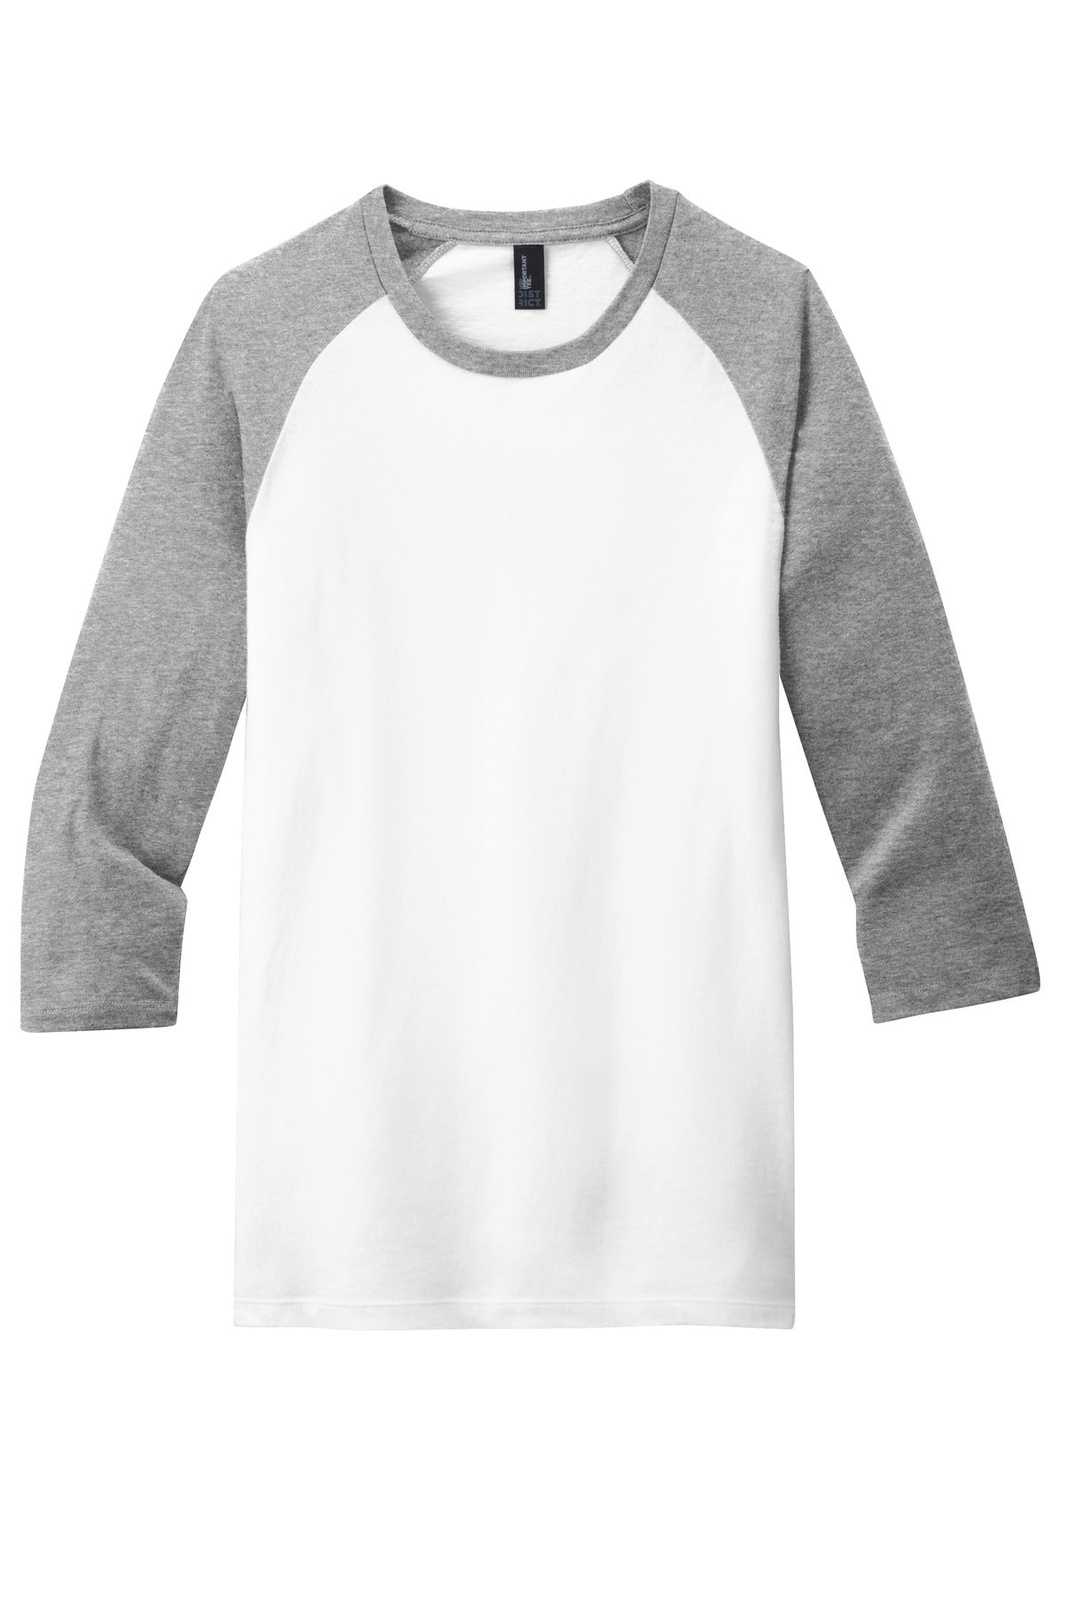 District DT6210 Very Important Tee 3/4-Sleeve Raglan - Light Heather Gray White - HIT a Double - 5